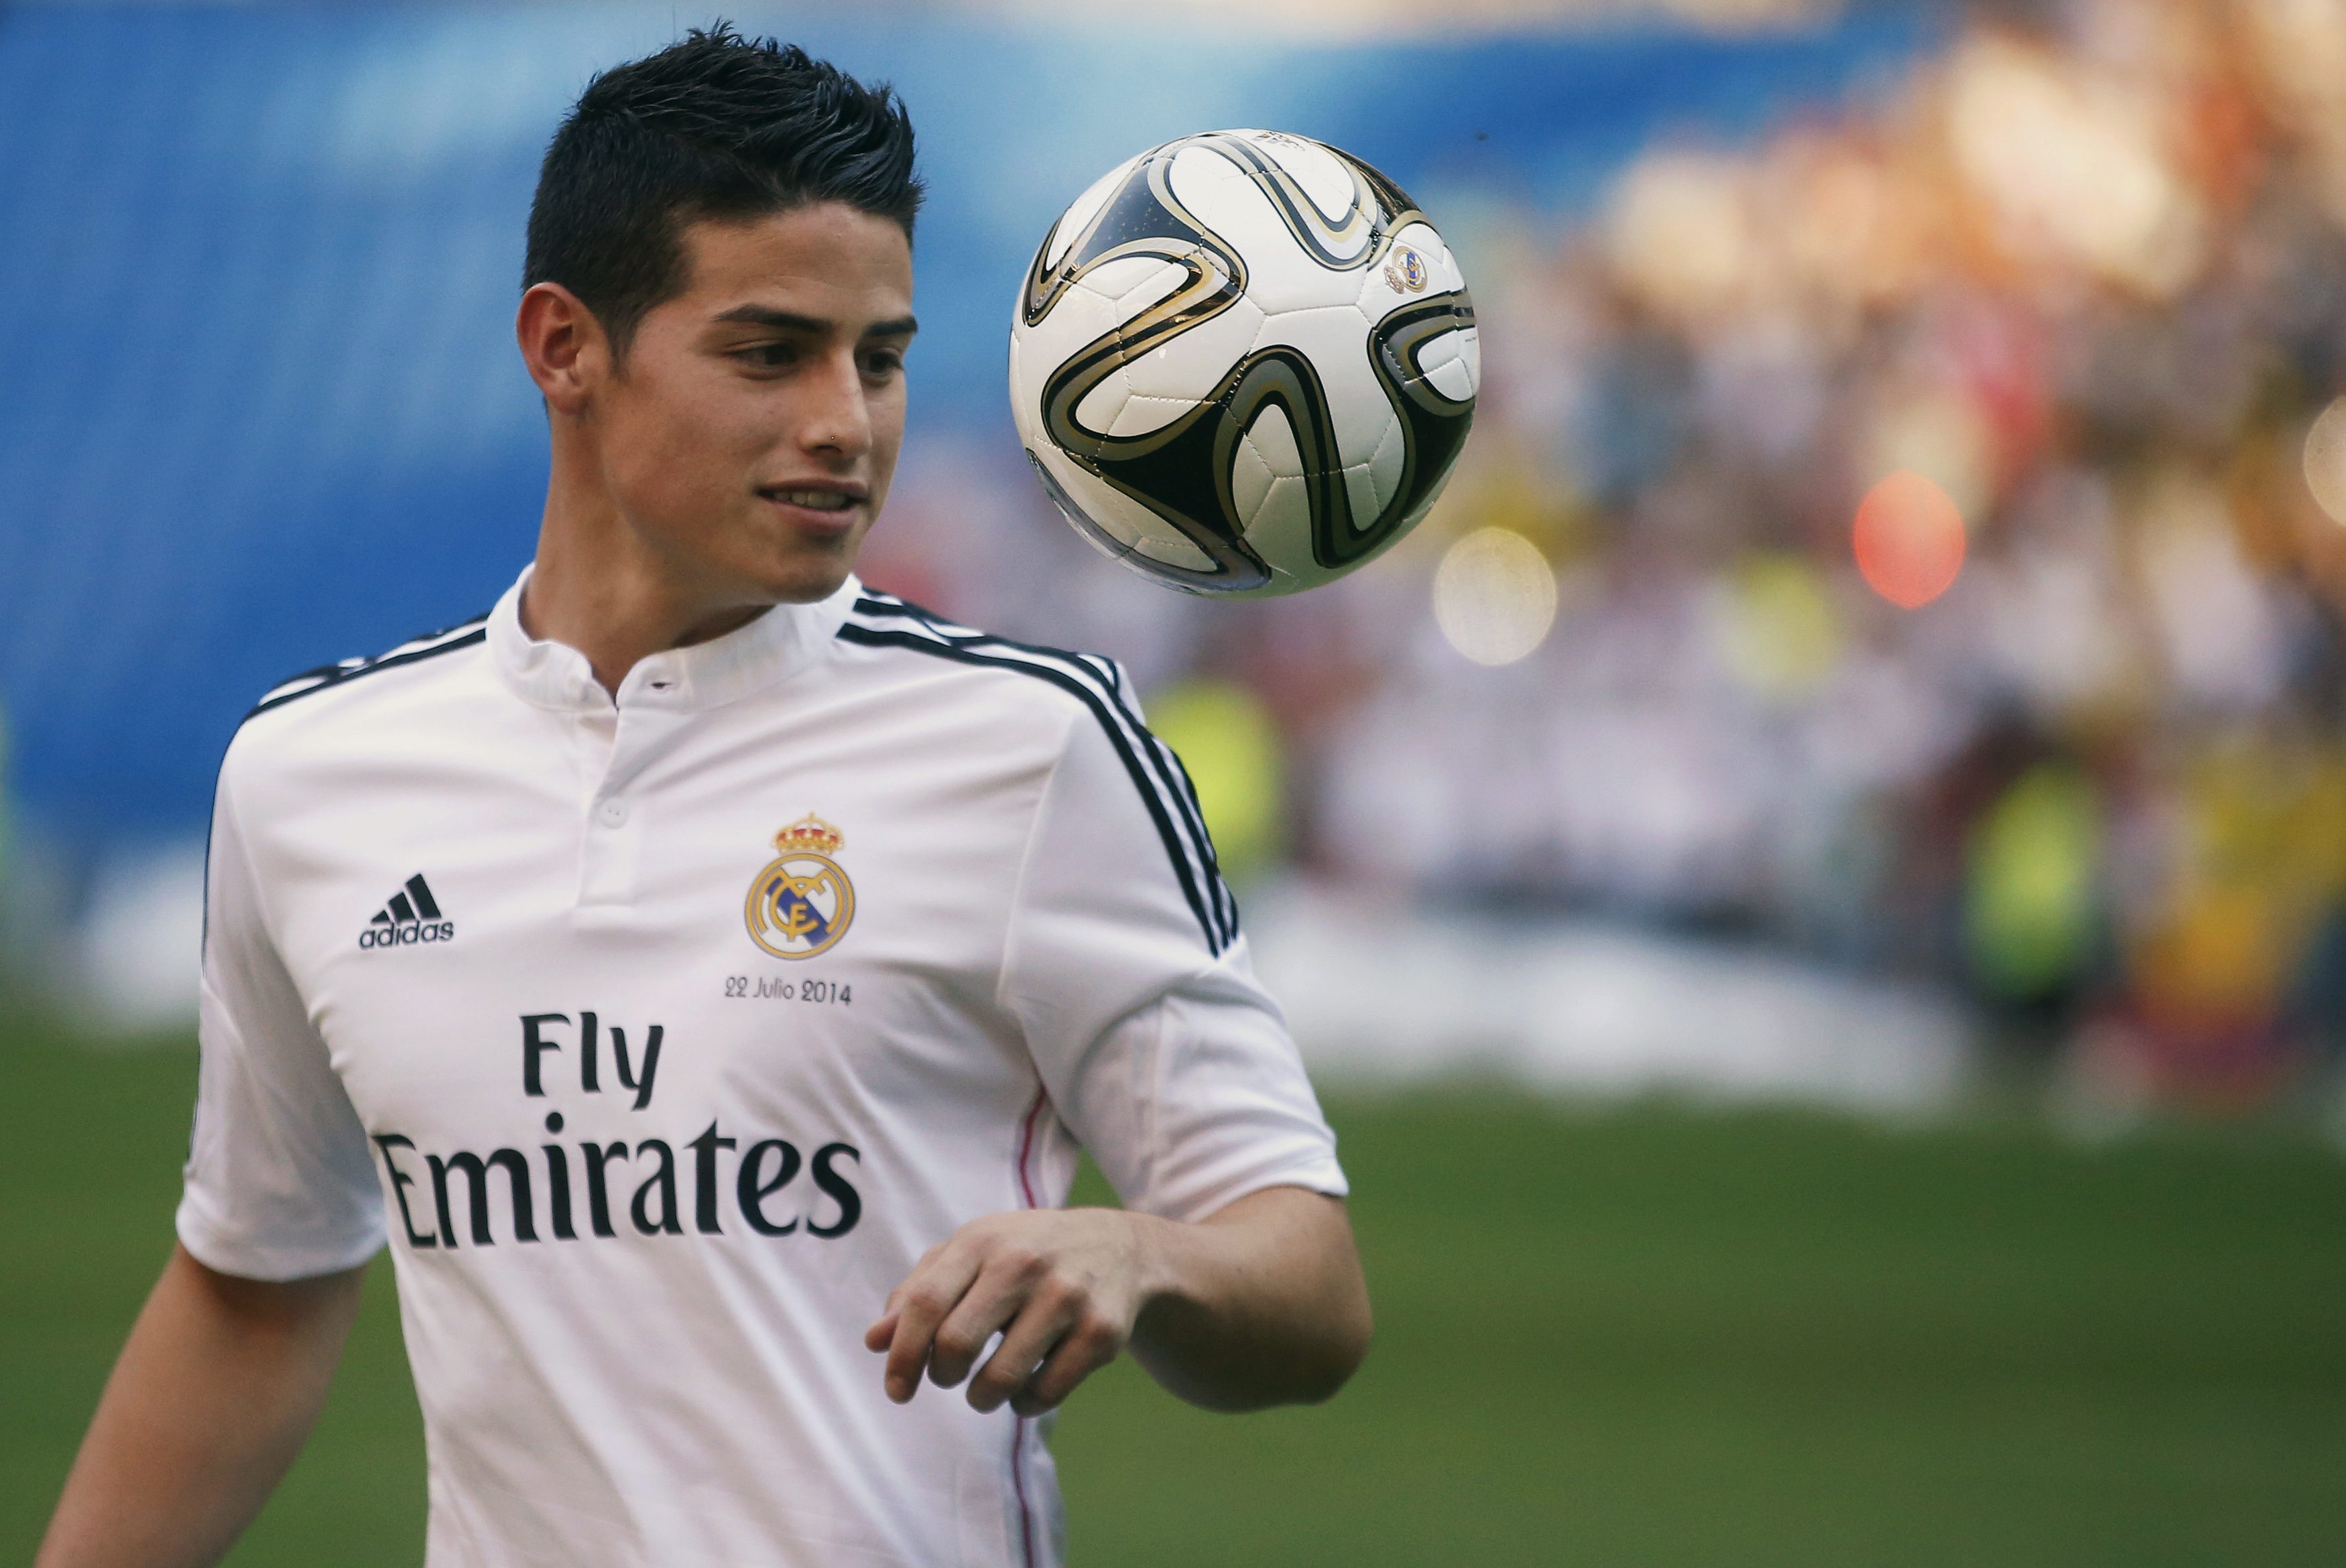 Colombia's soccer player James Rodriguez controls the ball during his presentation at the Santiago Bernabeu stadium in Madrid, July 22, 2014. Real Madrid have signed Rodriguez from Monaco on a six-year contract, the La Liga club said on Tuesday. The World